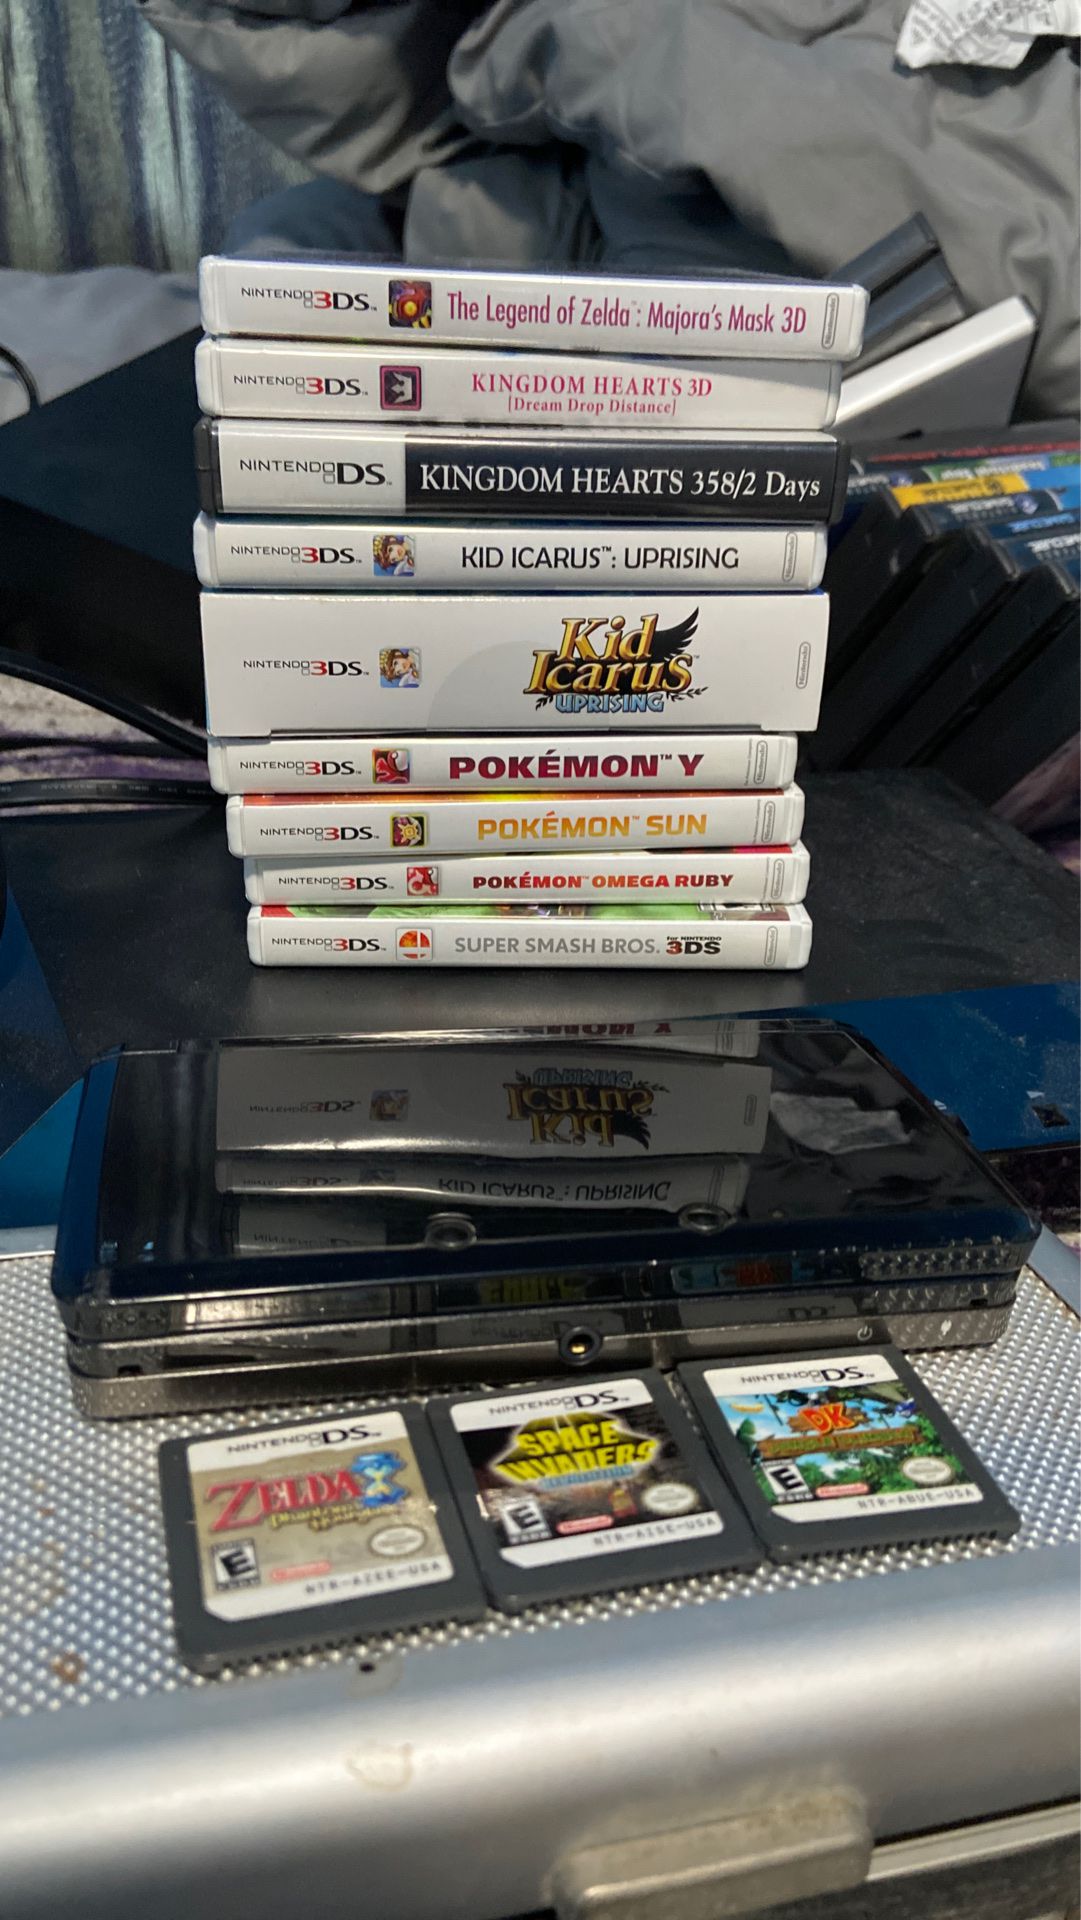 Nintendo 3DS games charger you and Ds games